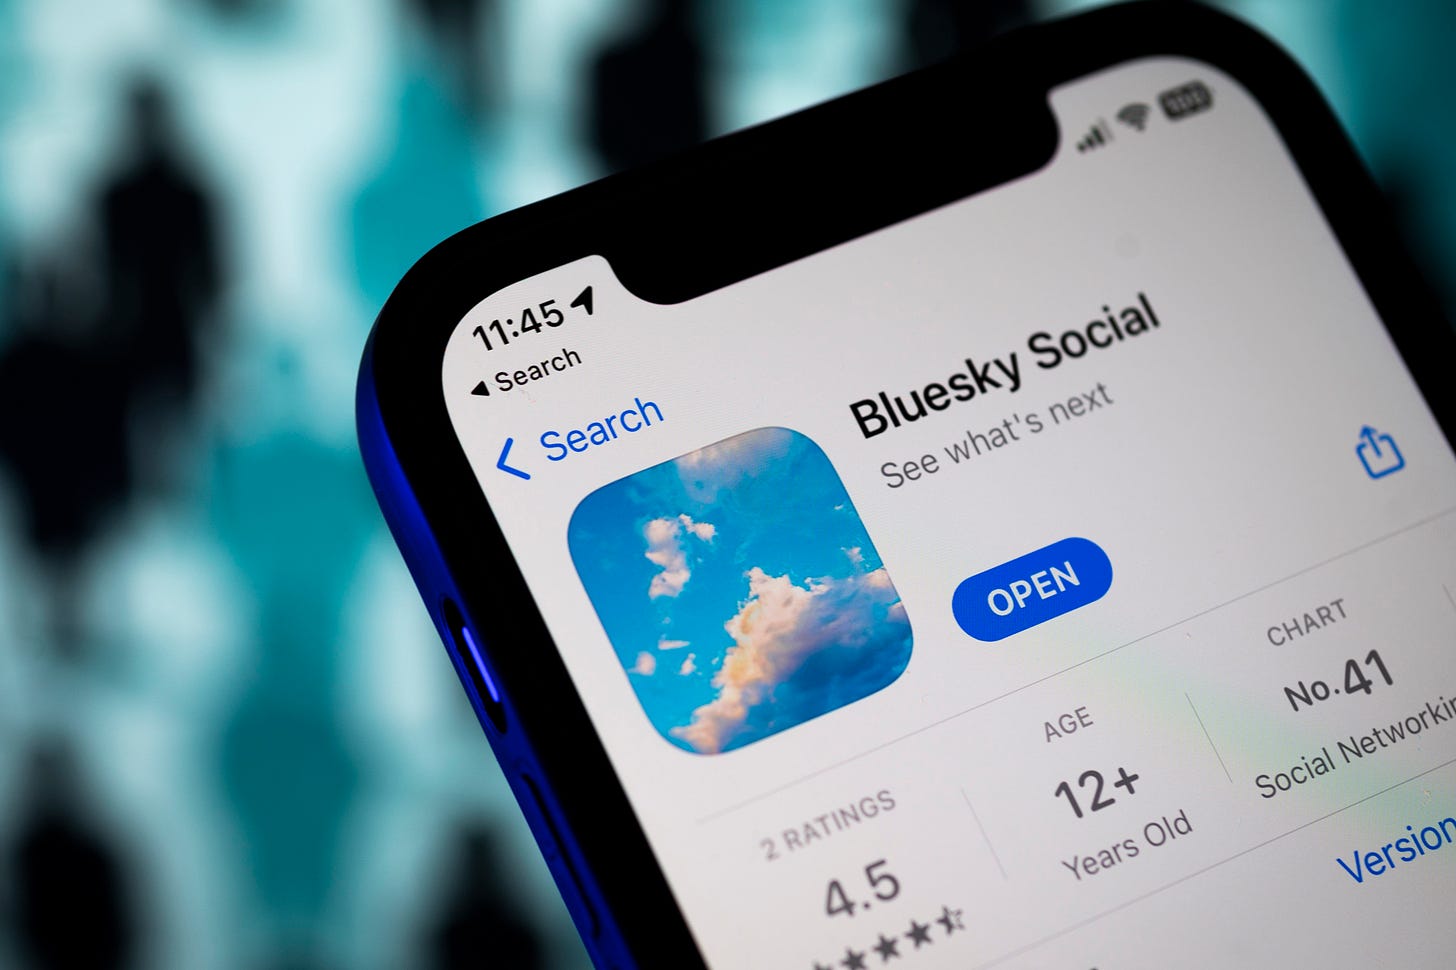 Bluesky buzz: Why the social media platform is being called the next Twitter